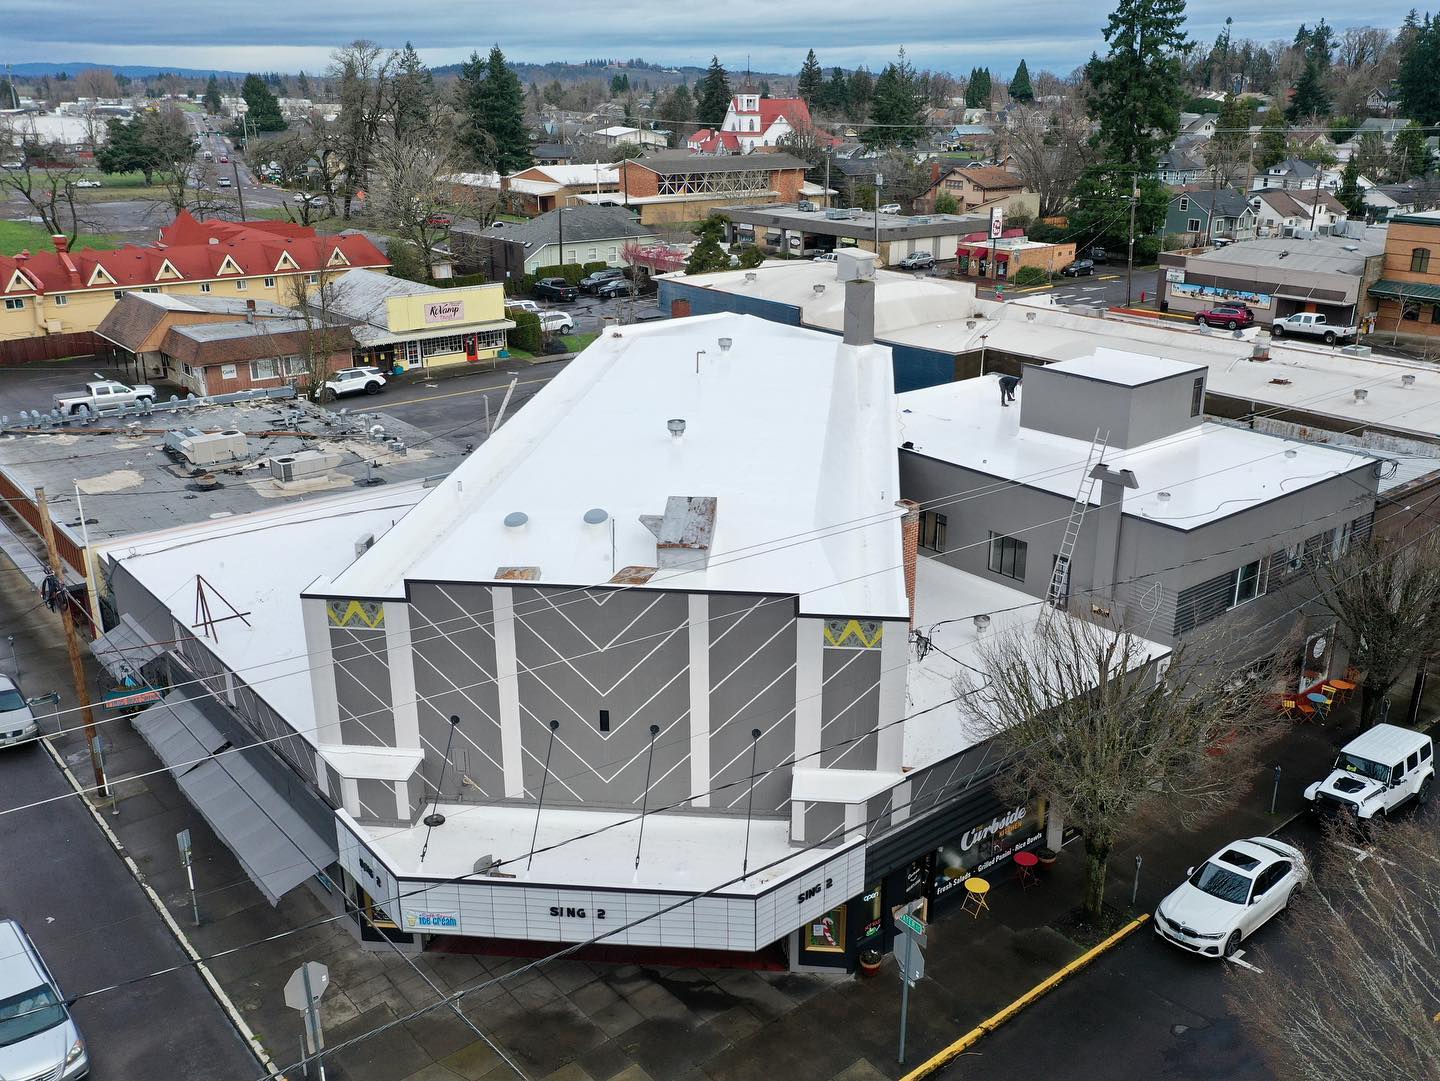 Commercial Roofing at The Palace Theater Silverton OR